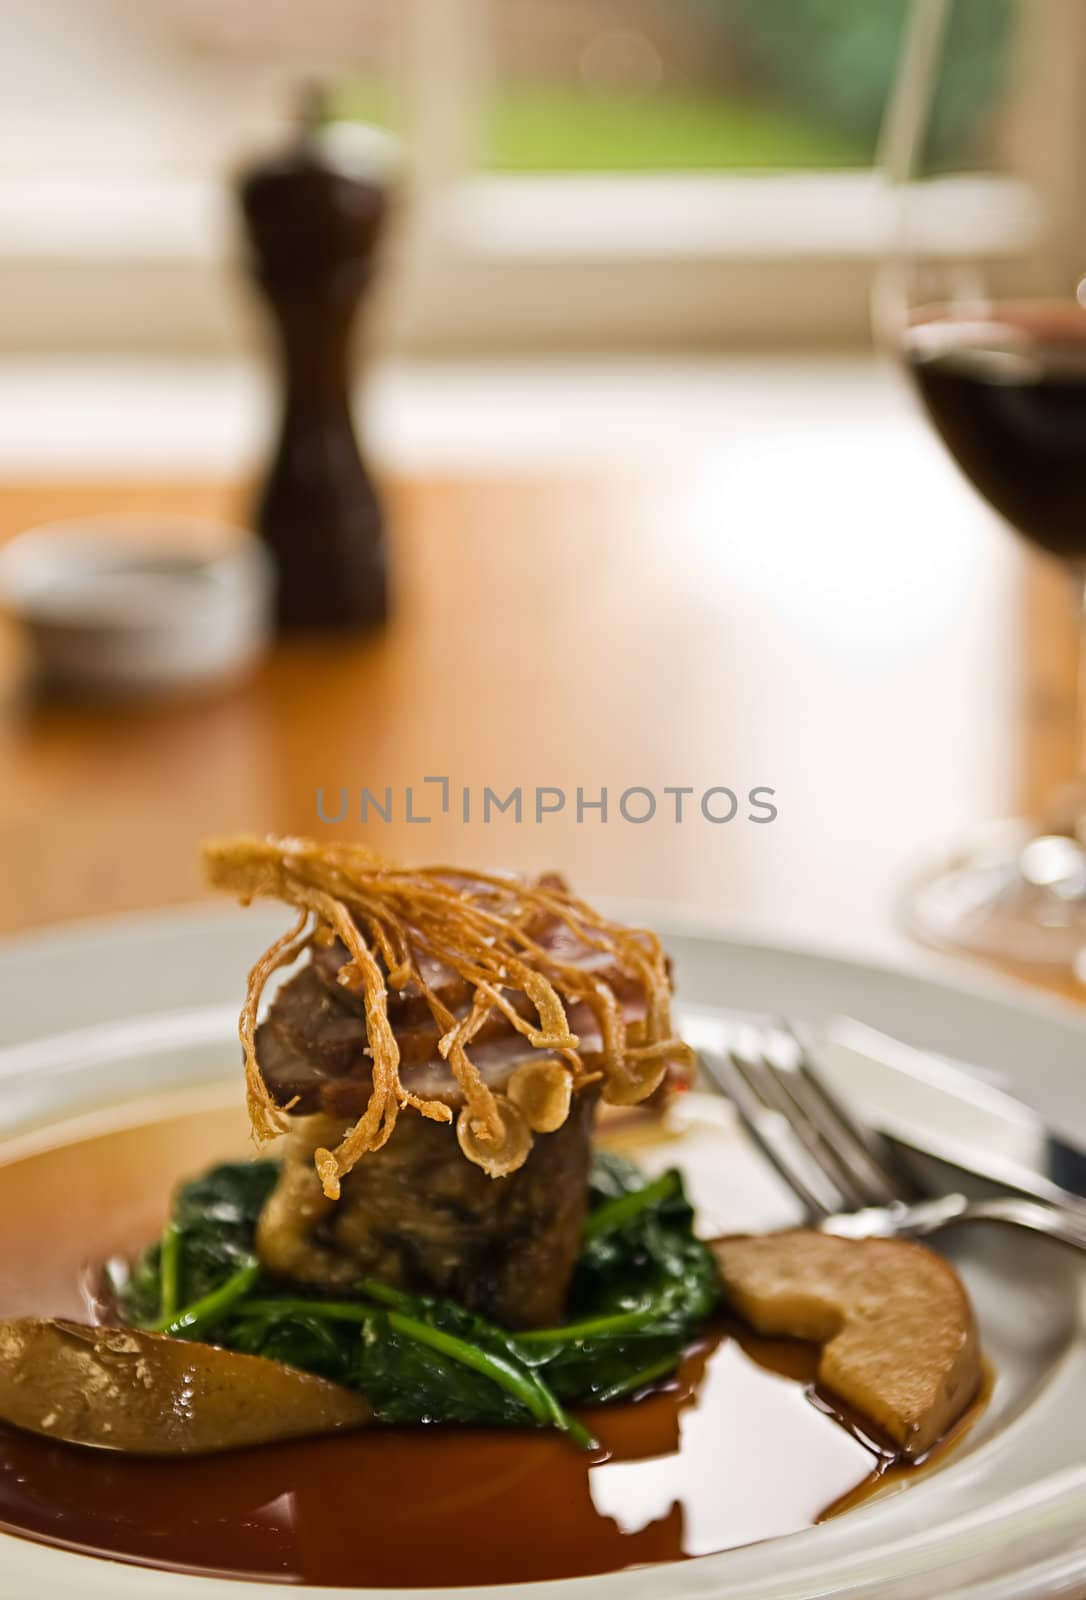 Crispy duck on a bed of spinach served with red wine in a restaurant.